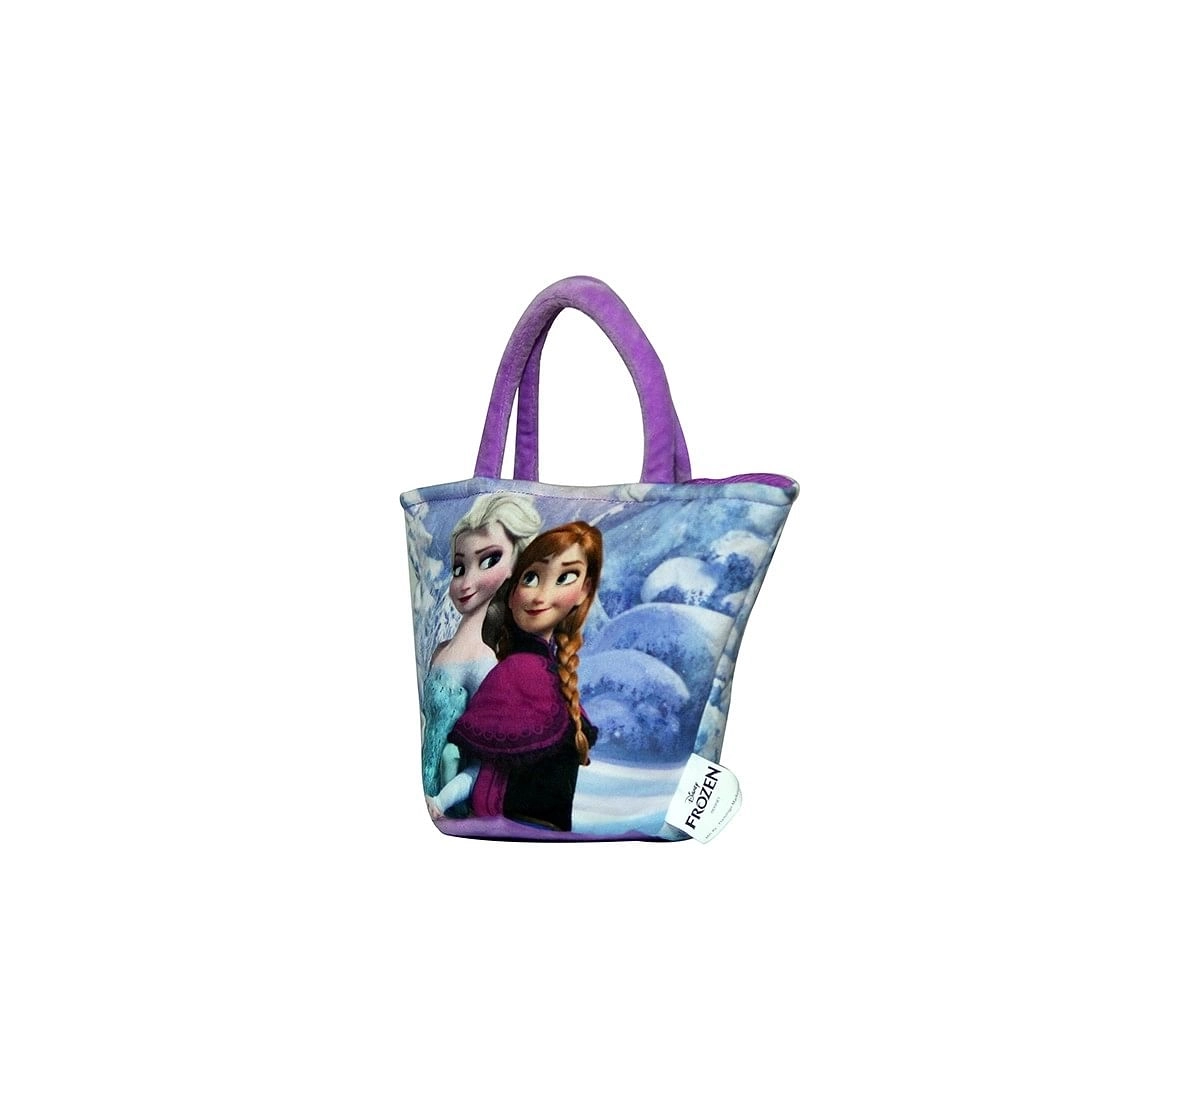 Disney Frozen Styling Hand Bag Plush Accessories for Kids age 12M+ - 19 Cm 